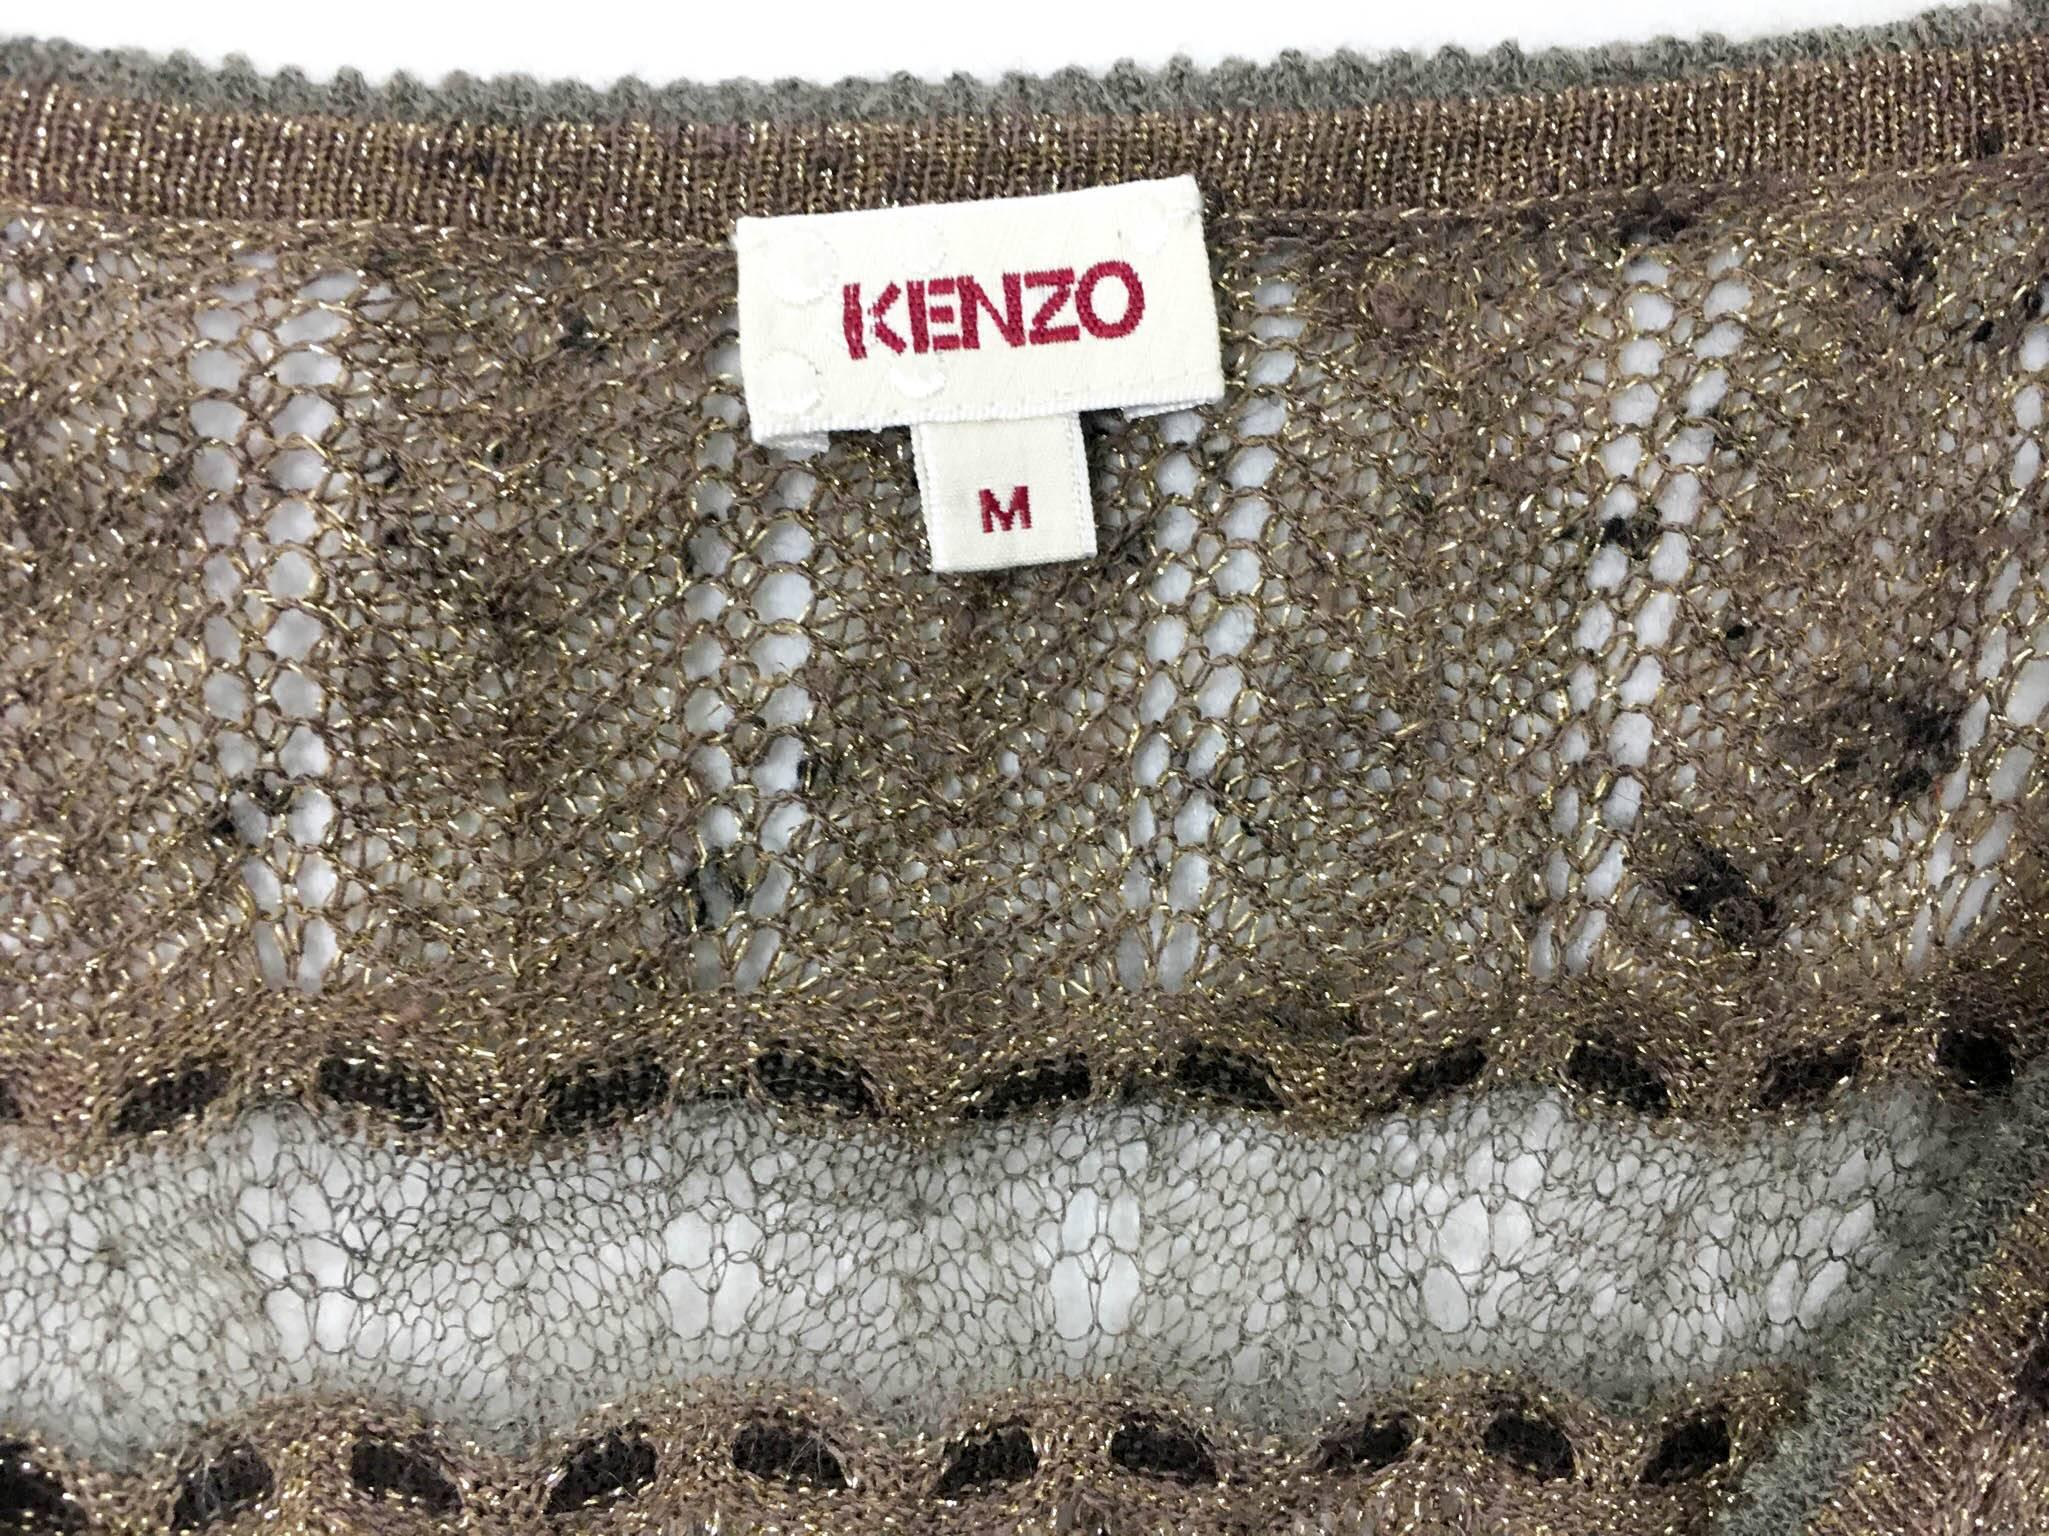 Kenzo Lurex Sheer Knitted Dress - 1990s For Sale 5